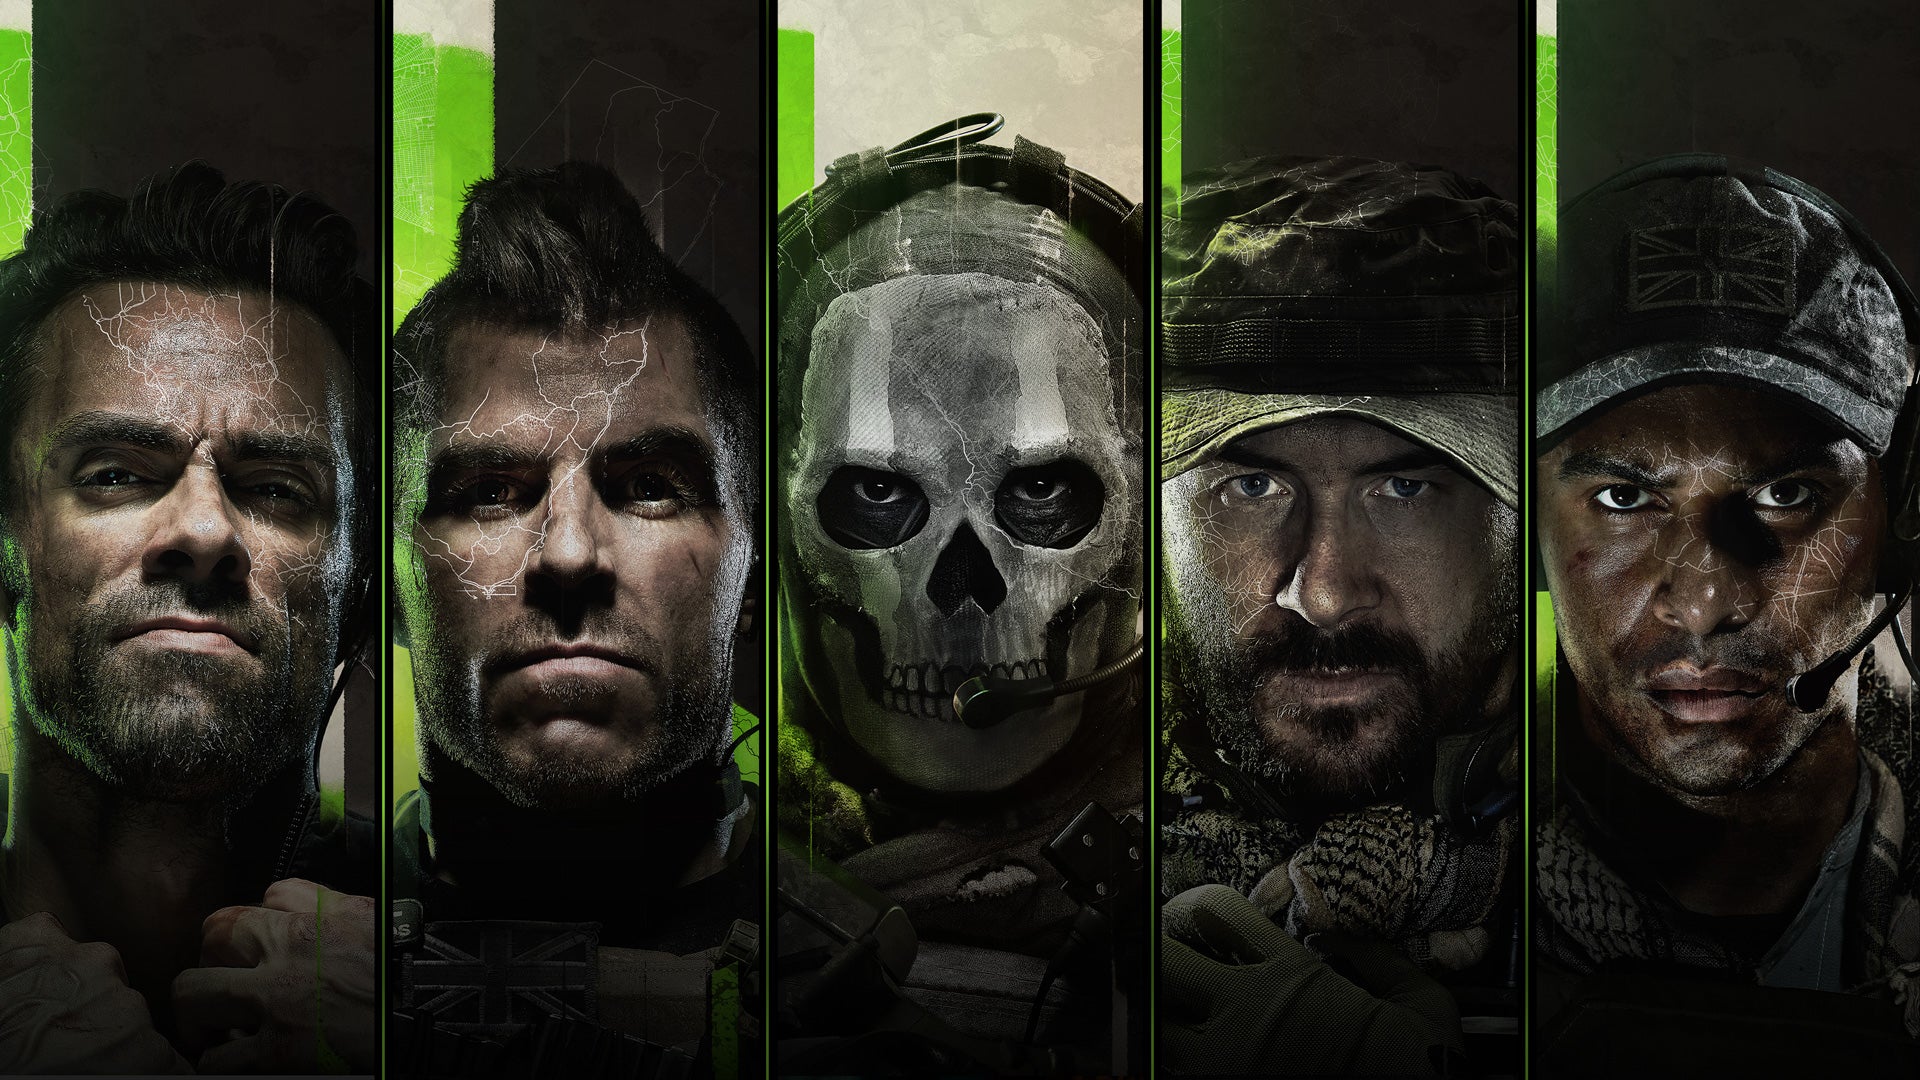 Image for The opening weekend of Call of Duty: Modern Warfare 2's beta has been divisive